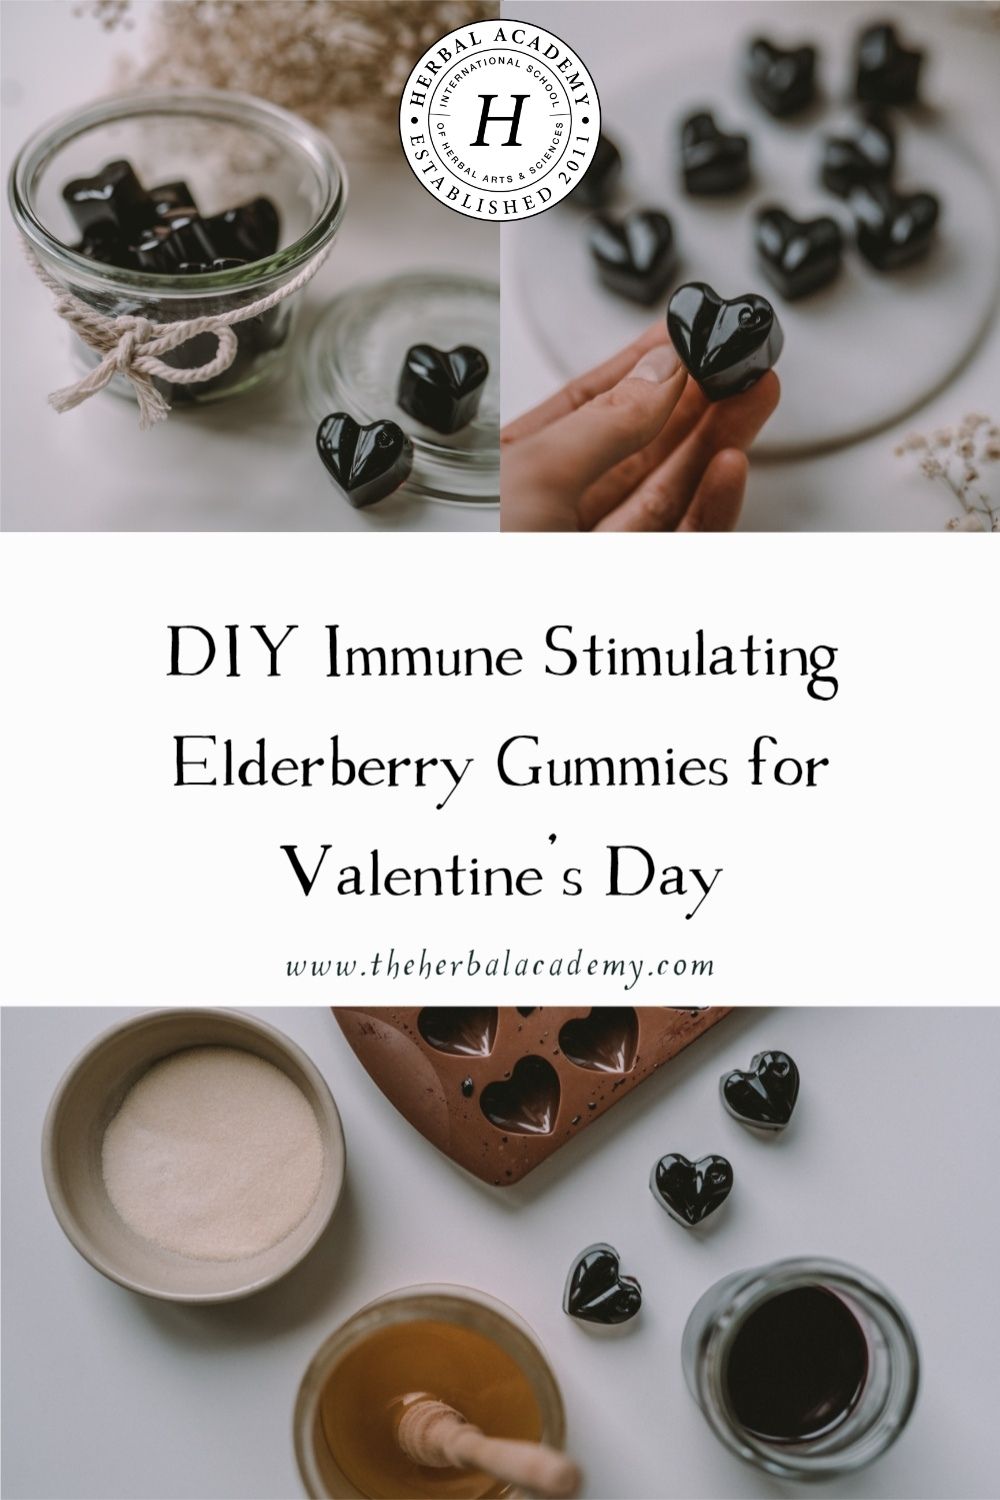 DIY Immune Stimulating Elderberry Gummies for Valentine's Day | Herbal Academy | These elderberry gummies are not only delicious but will provide immune-stimulating support for your loved ones!